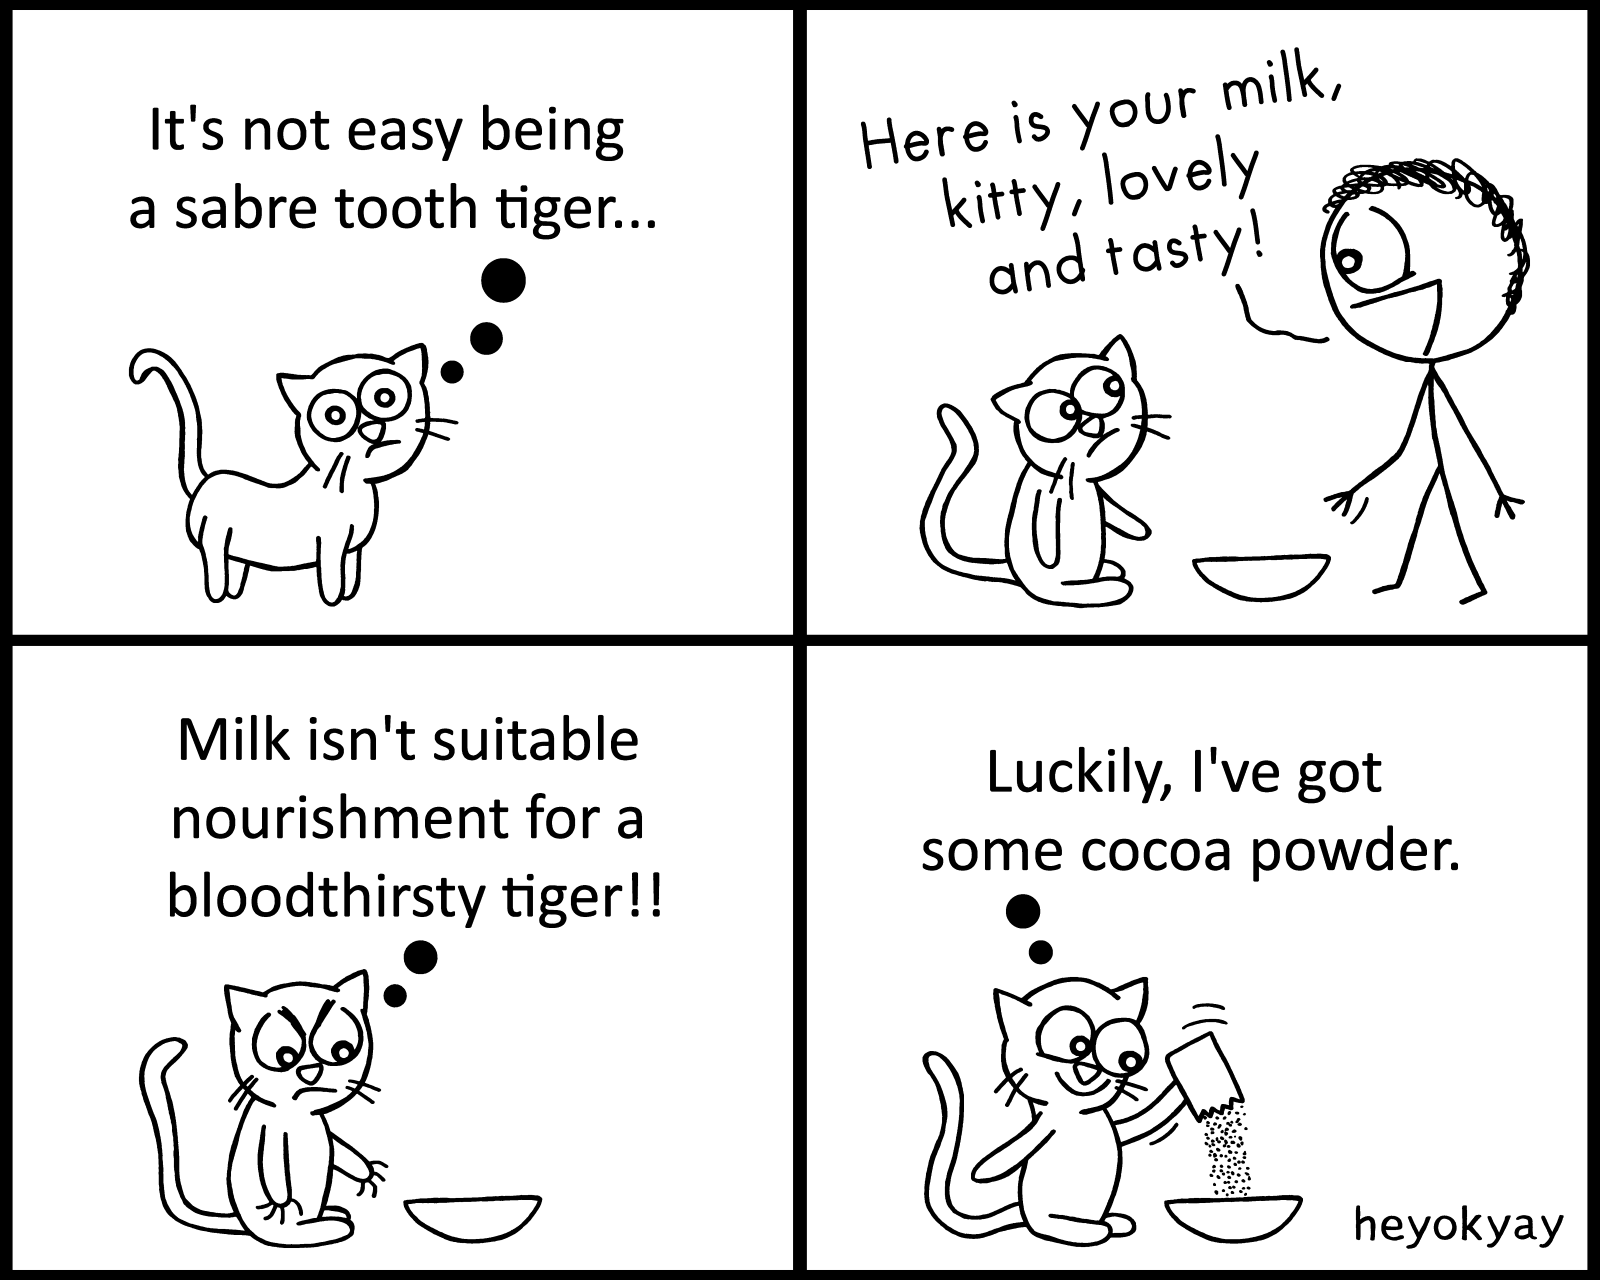 It's not easy being a sabre tooth tiger... Here is your milk, kitty, lovely and tasty! Milk isn't suitable nourishment for a bloodthirsty tiger! Luckily, I've got some cocoa powder. Tiger heyokyay comic